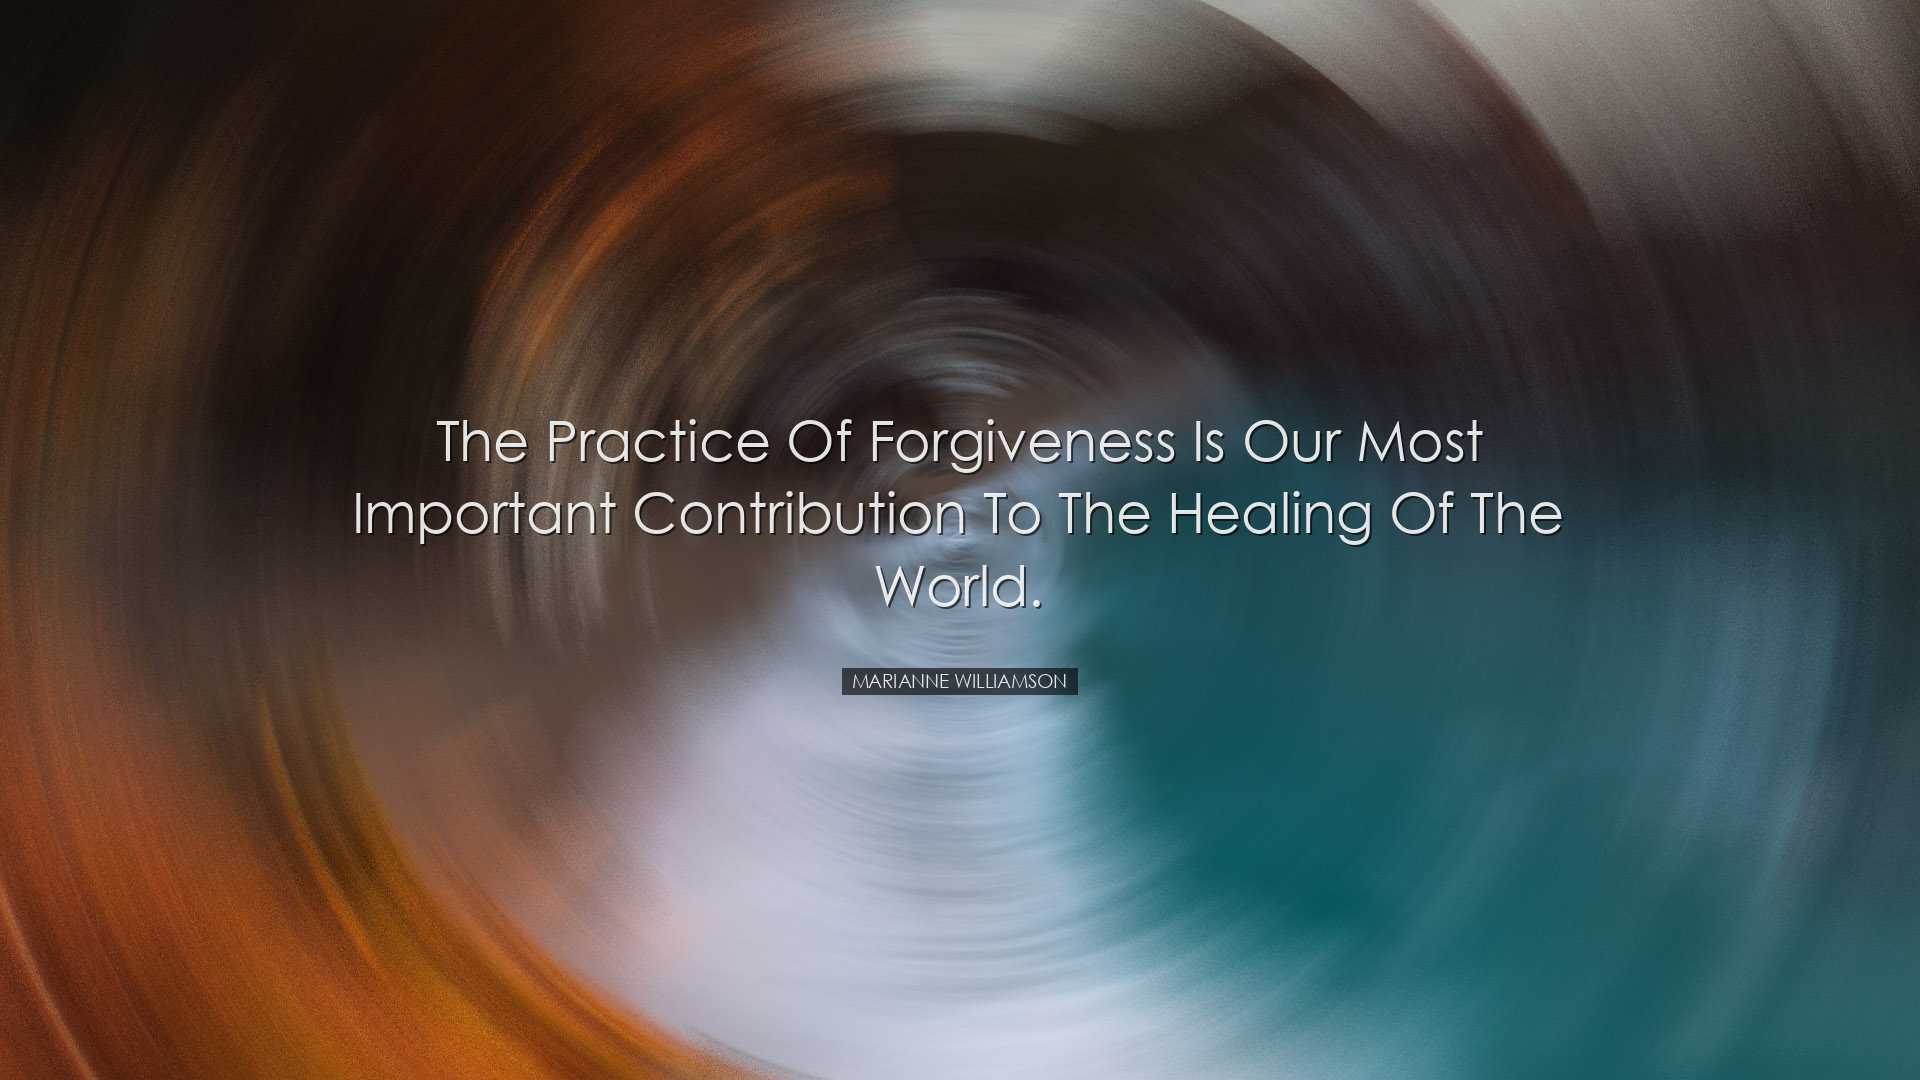 The practice of forgiveness is our most important contribution to